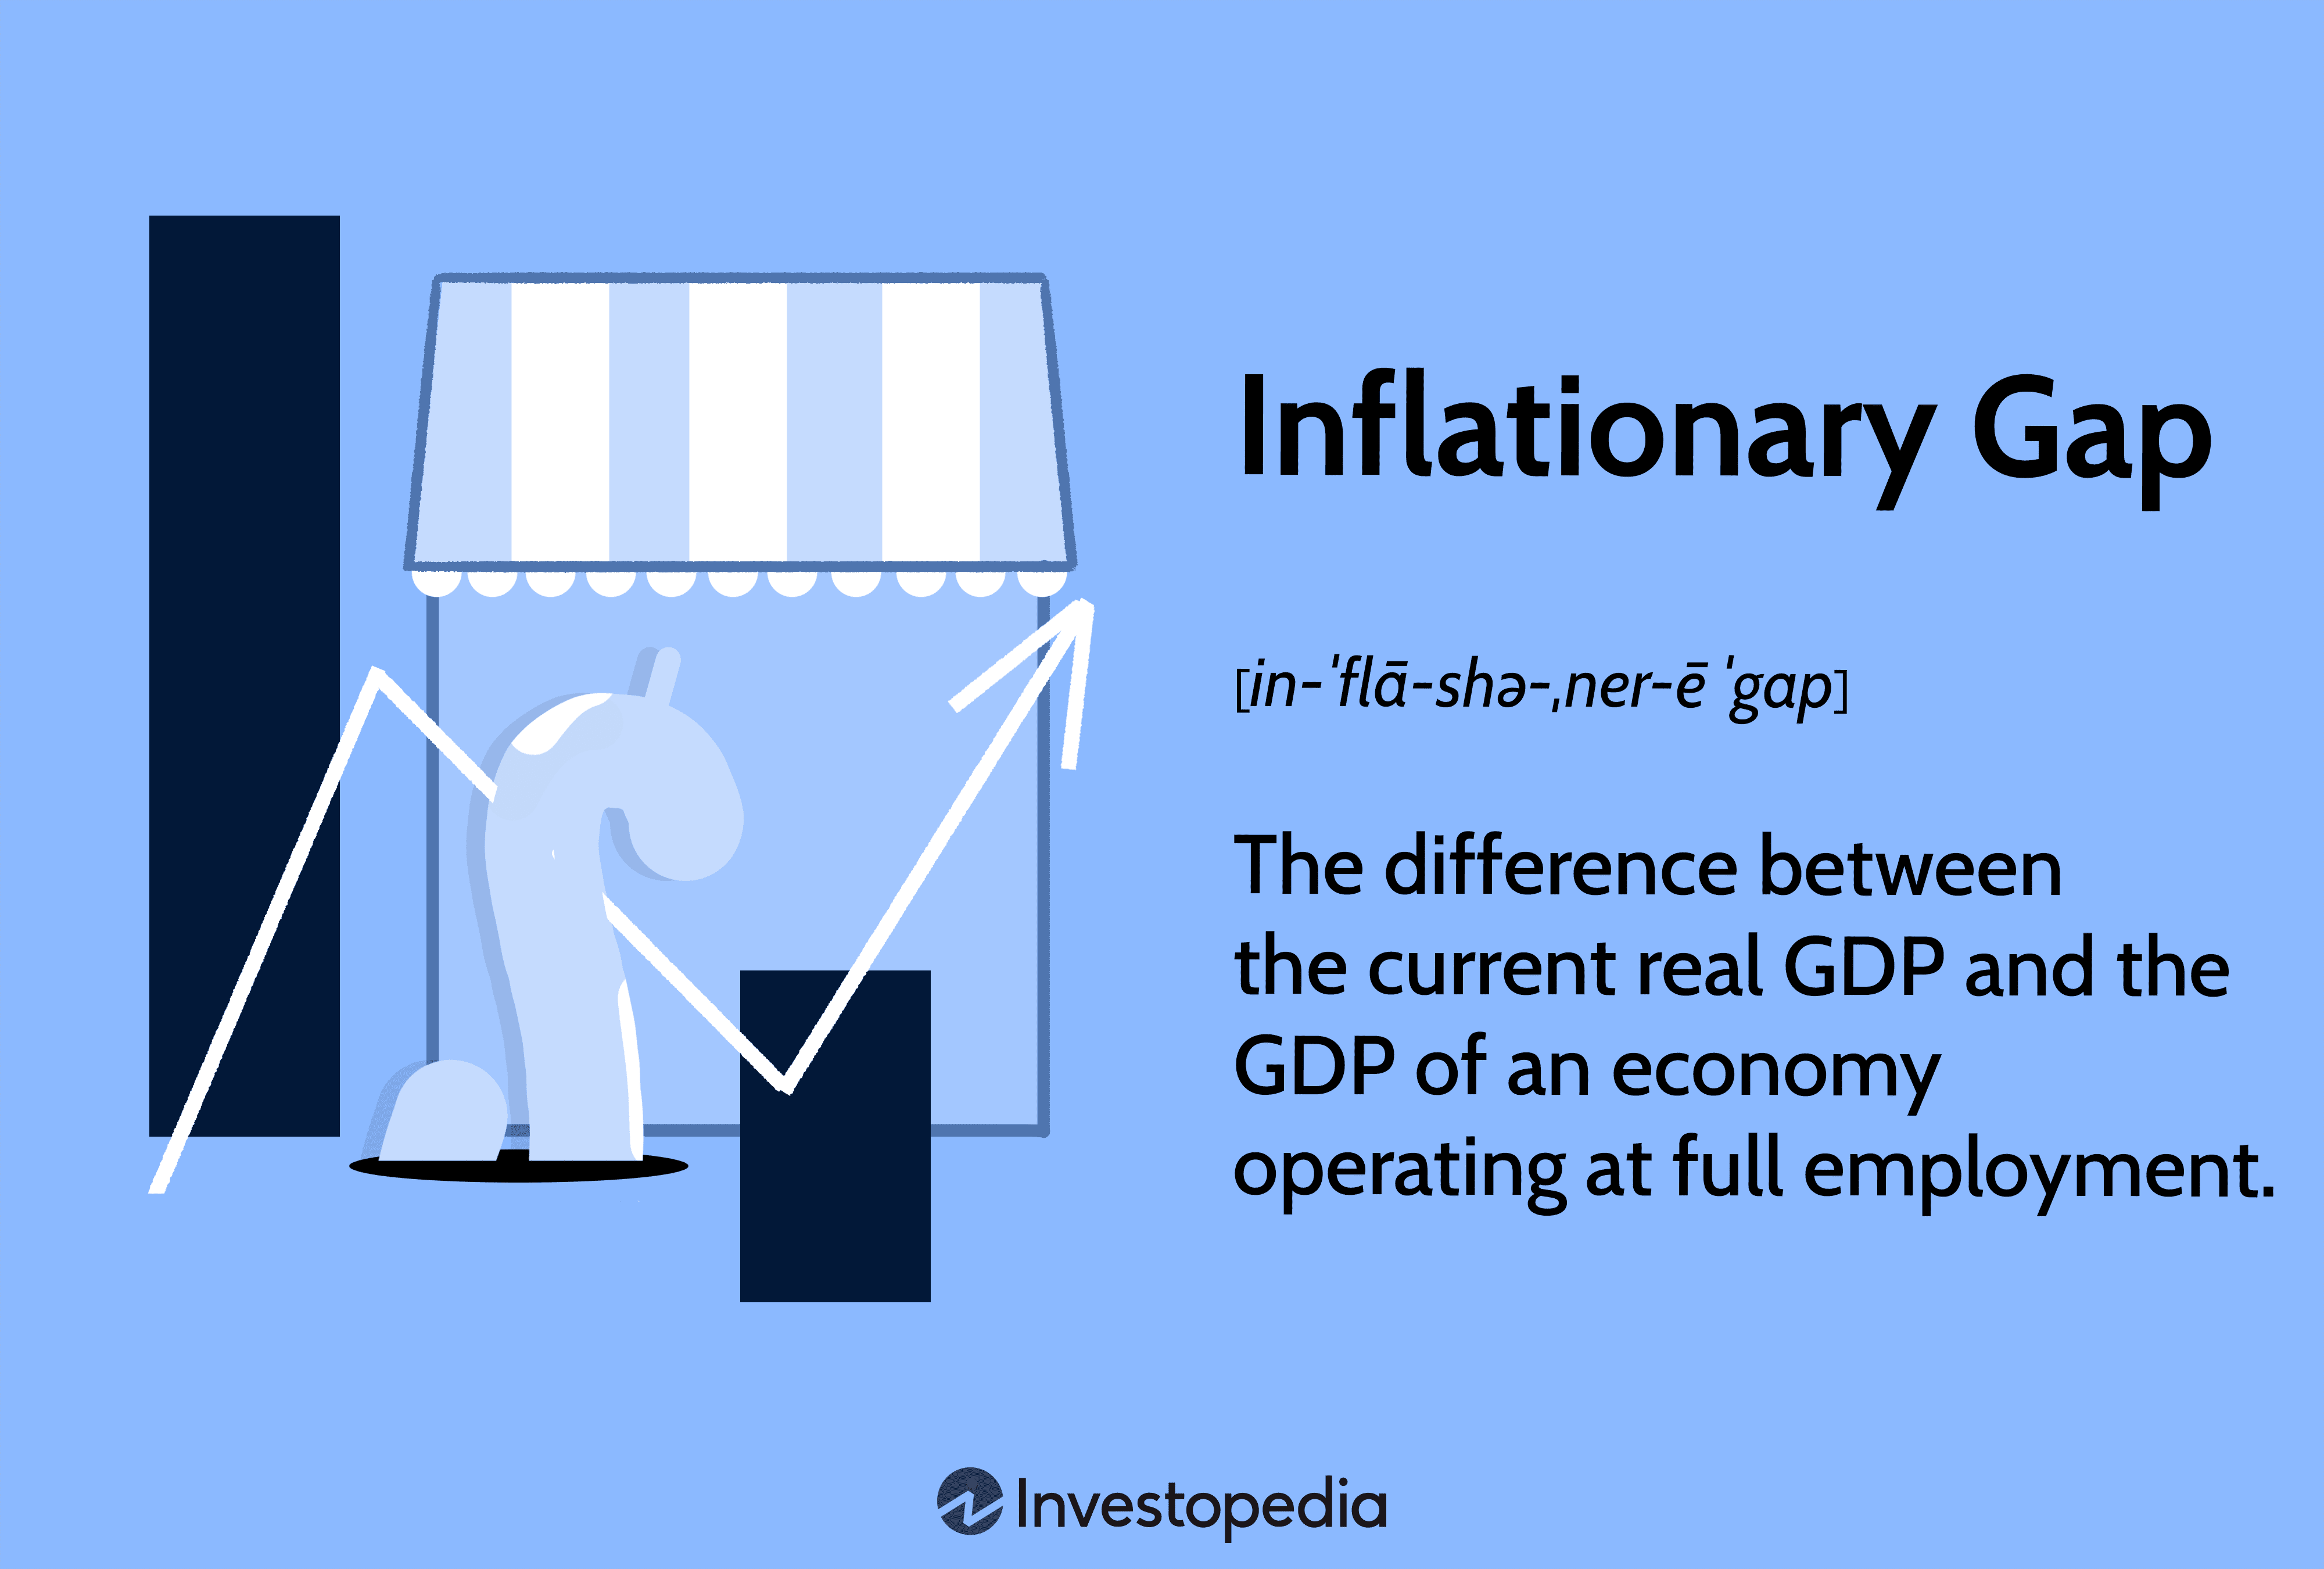 Inflationary Gap: The difference between the current real GDP and the GDP of an economy operating at full employment.